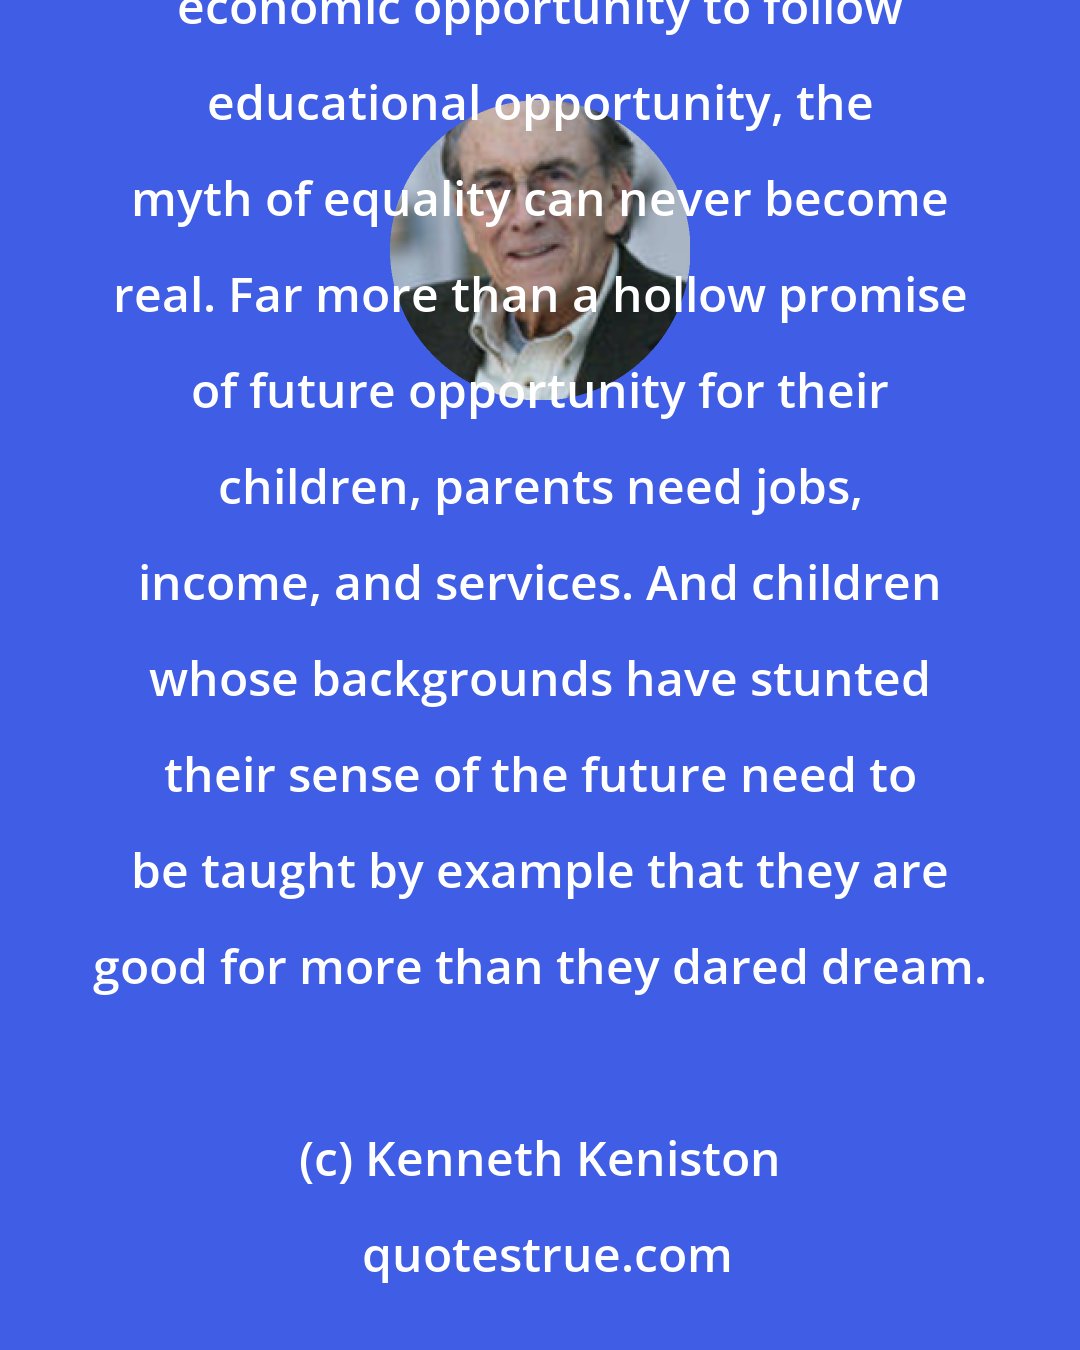 Kenneth Keniston: Schools, the institutions traditionally called upon to correct social inequality, are unsuited to the task; without economic opportunity to follow educational opportunity, the myth of equality can never become real. Far more than a hollow promise of future opportunity for their children, parents need jobs, income, and services. And children whose backgrounds have stunted their sense of the future need to be taught by example that they are good for more than they dared dream.